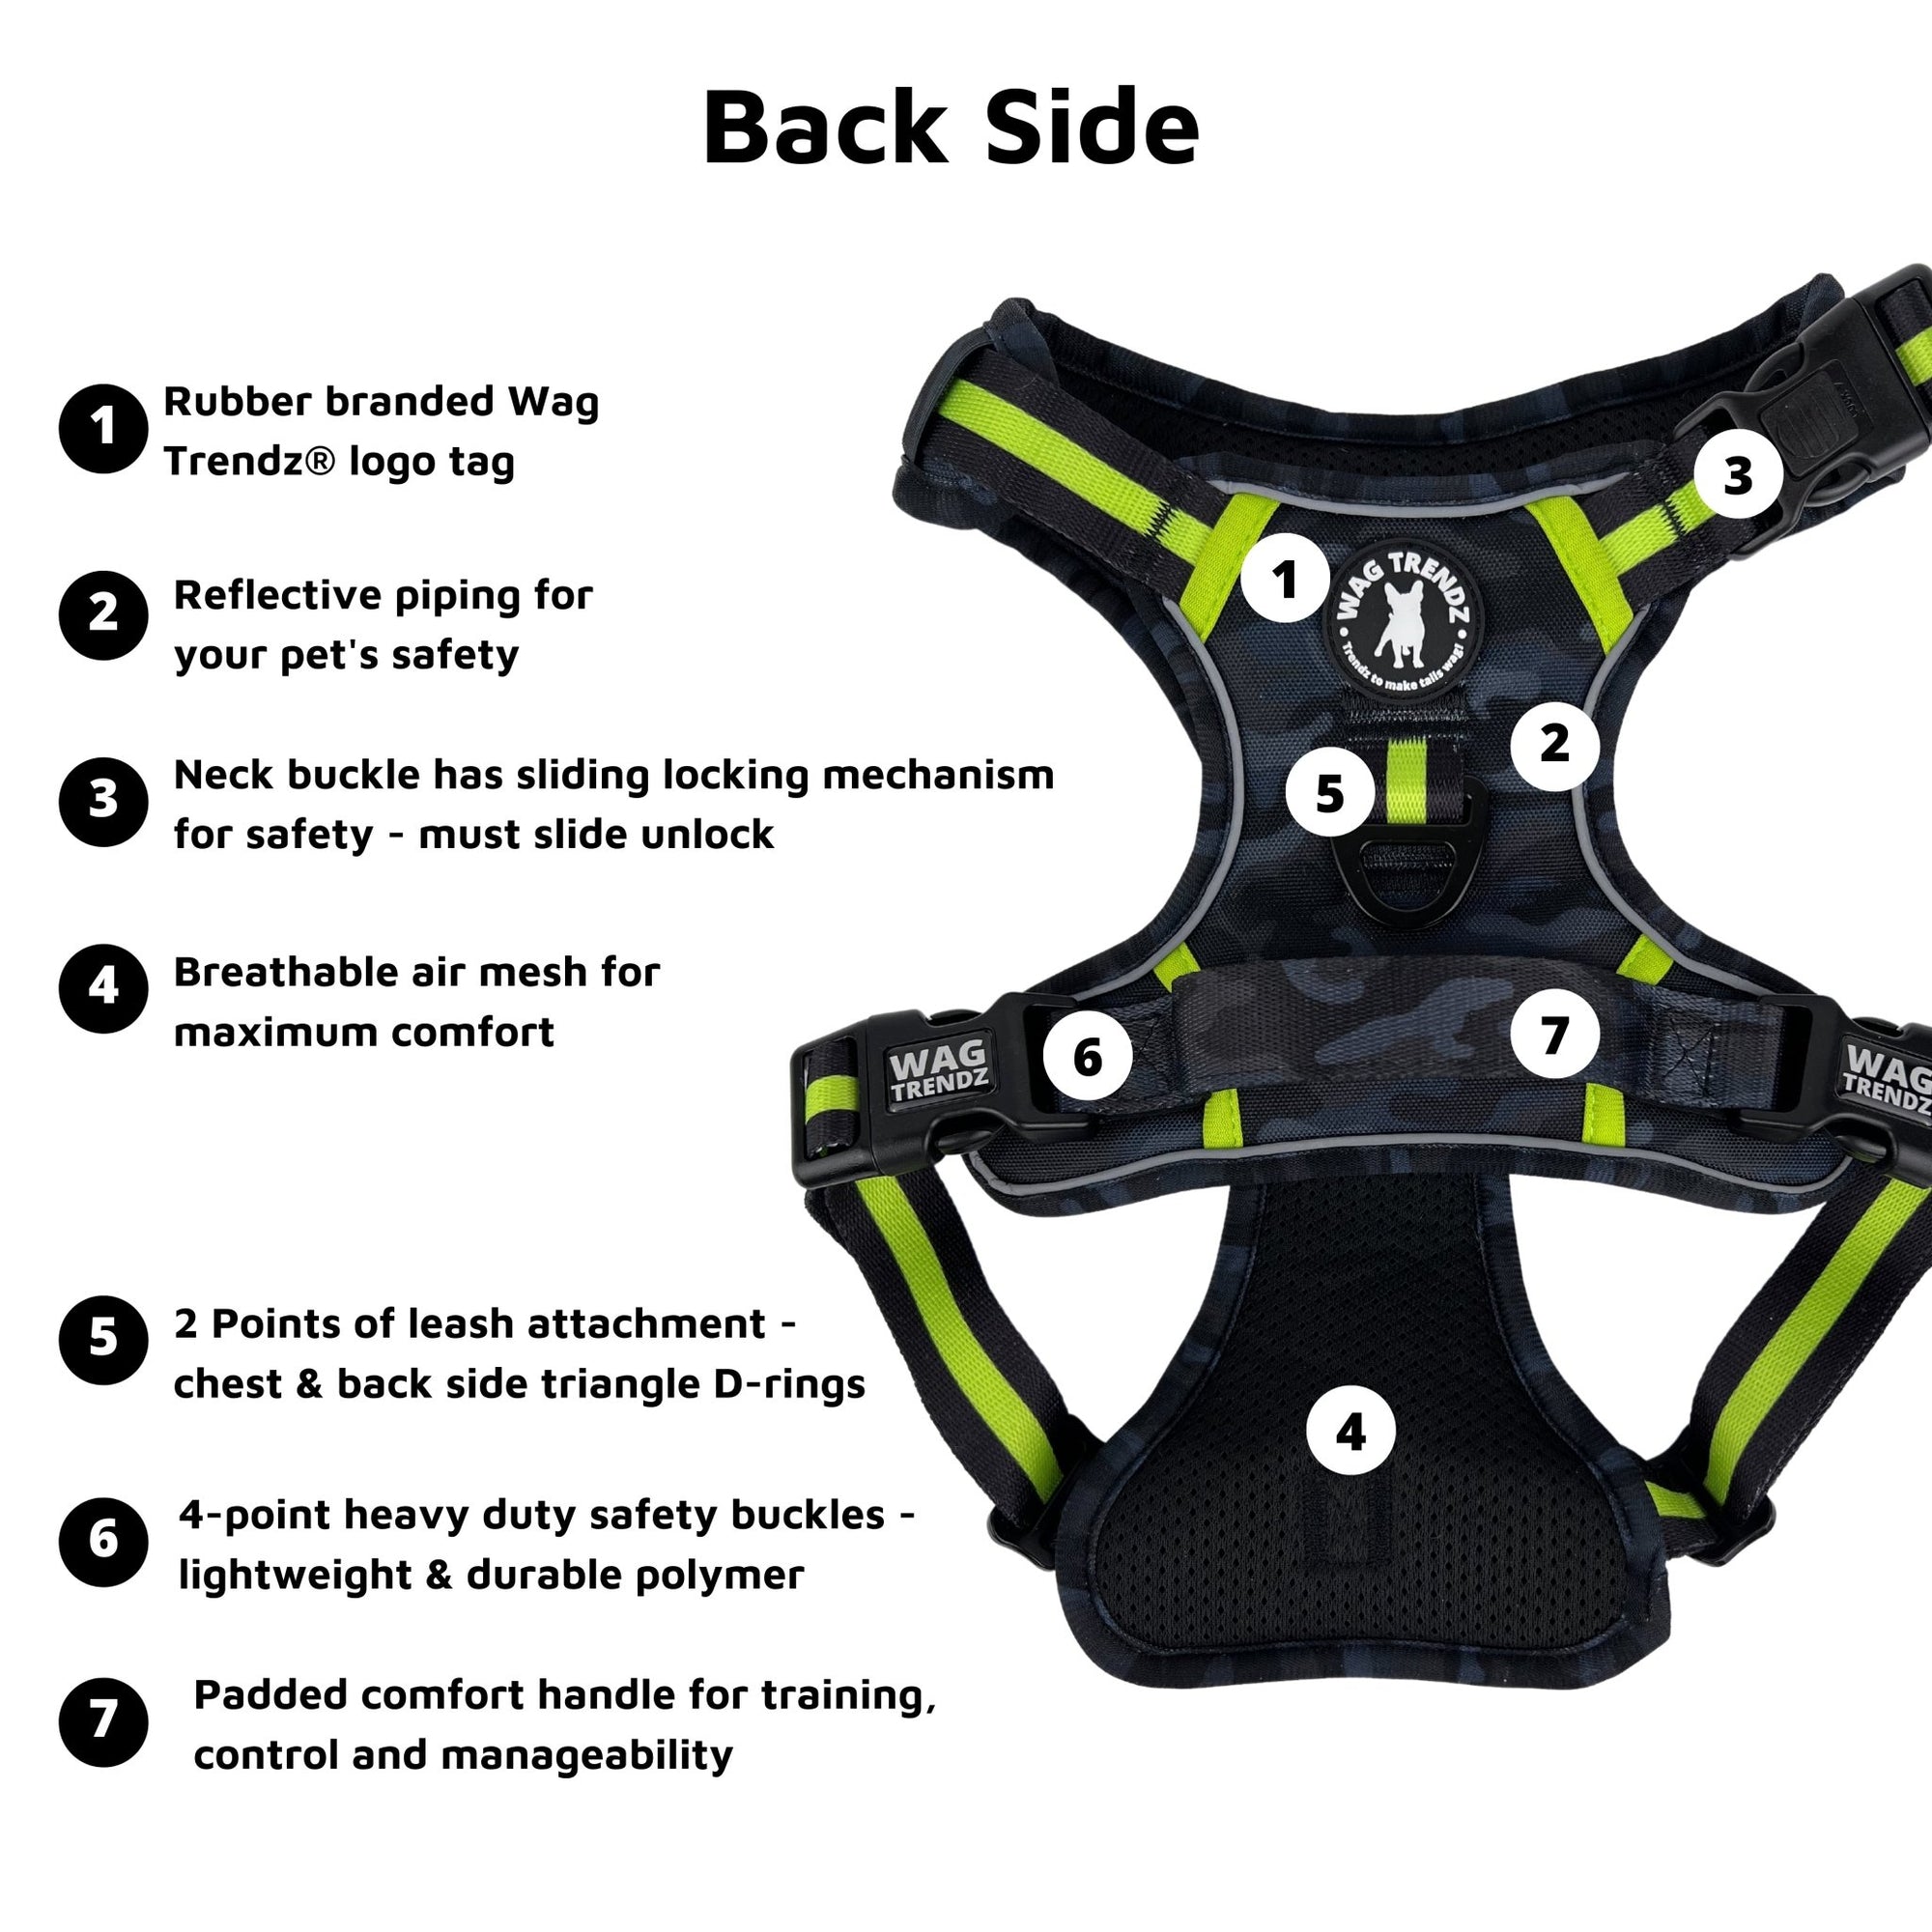 No Pull Dog Harness - With Handle - black and gray camo no pull harness with hi vis accents features - back view - against solid white background - Wag Trendz